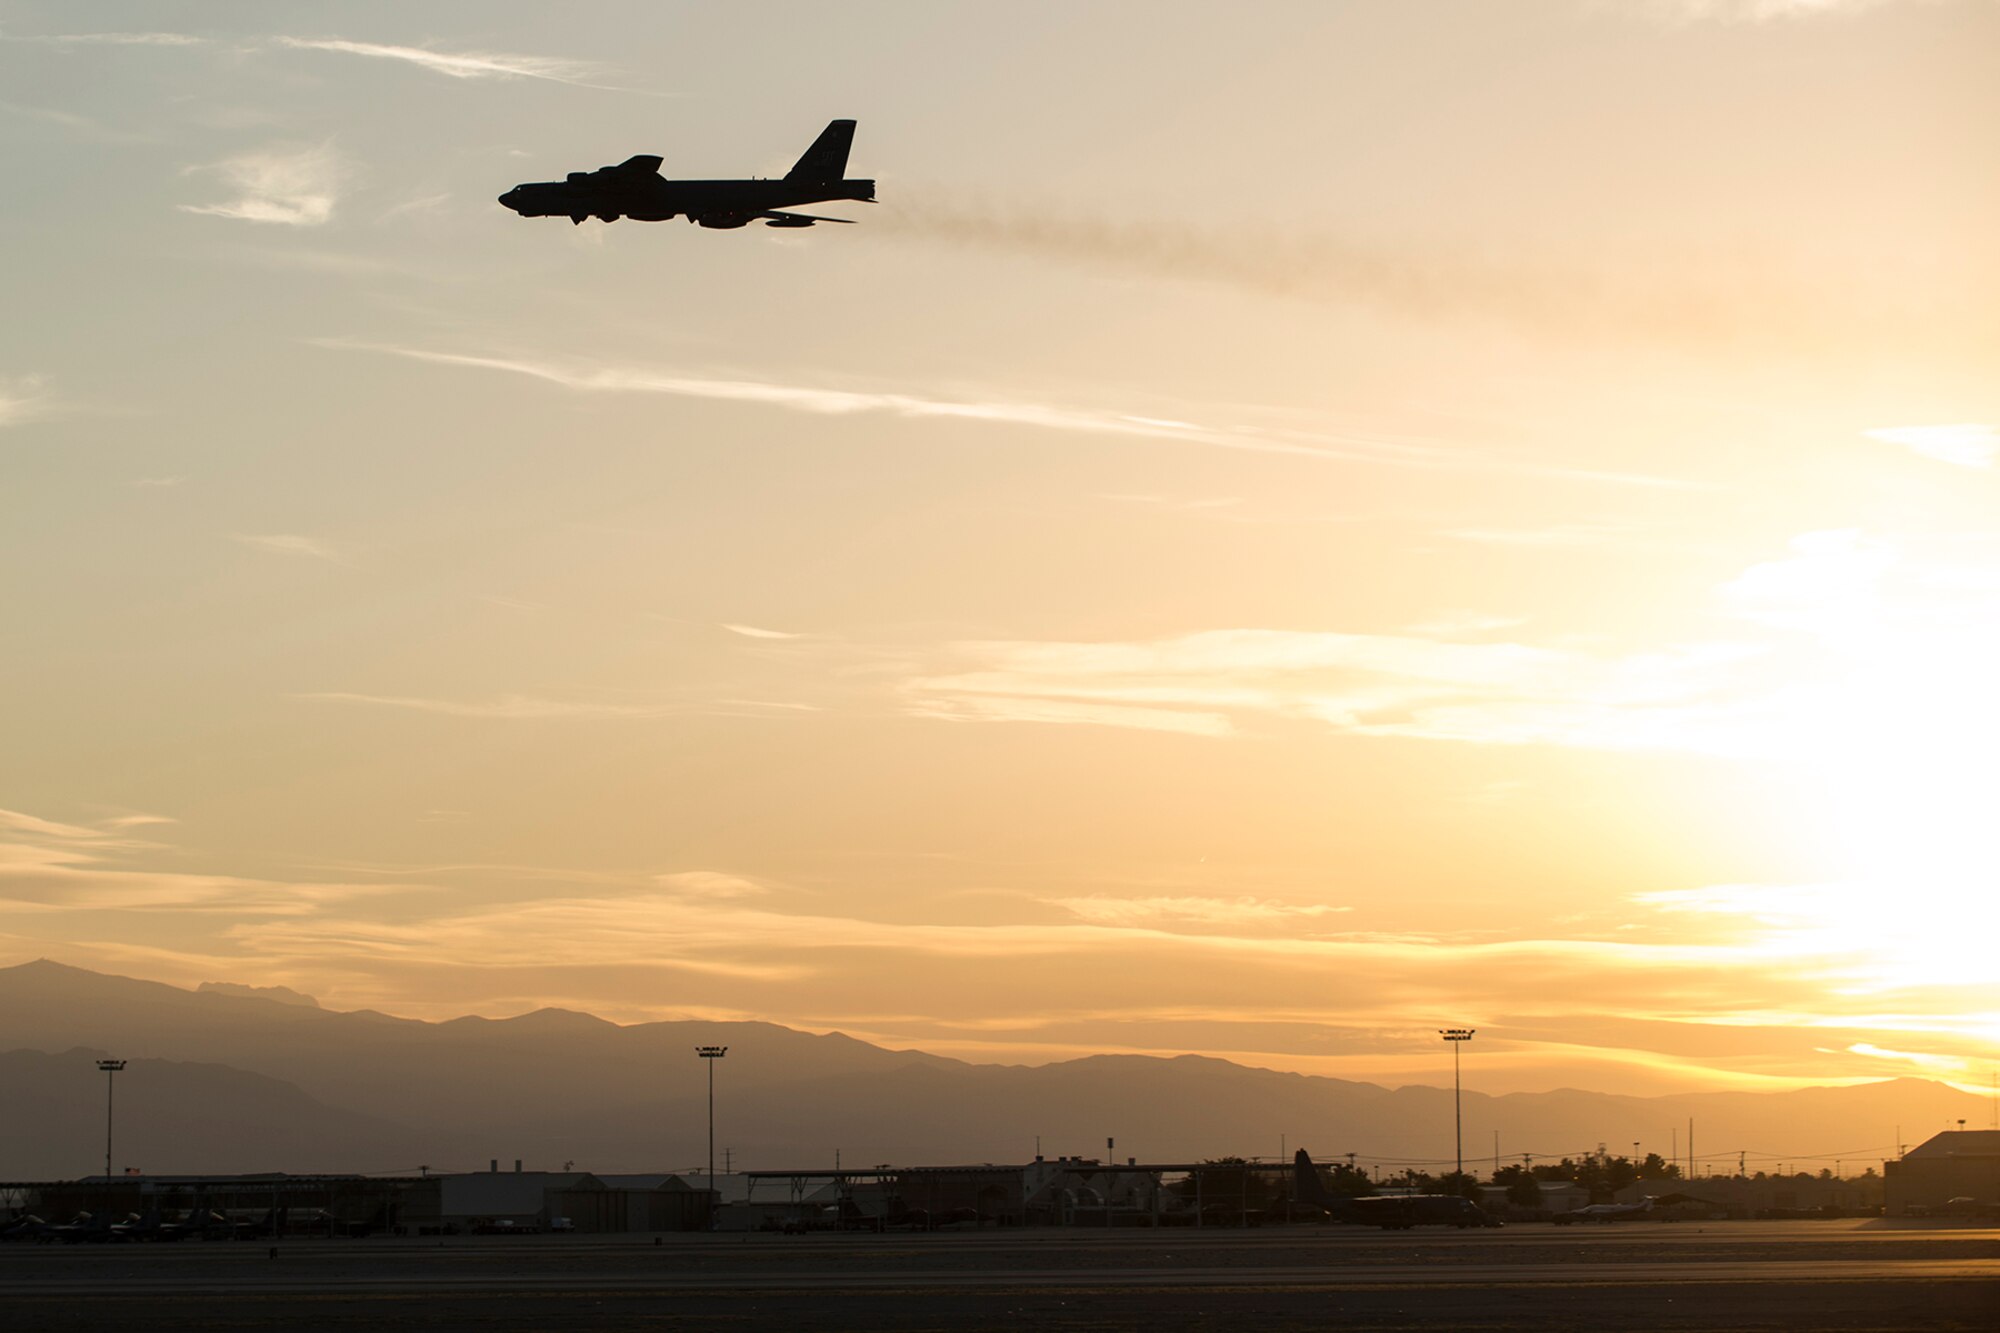 An Air Force Reserve Command B-52H Stratofortress takes on for an evening mission on June 8, 2016, Nellis Air Force Base, Nev. The aircraft is assigned to the 307th Bomb Wing at Barksdale Air Force Base, La., and is at Nellis in support of the 340th Weapons Squadron. (U.S. Air Force photo by Master Sgt. Greg Steele/Released)